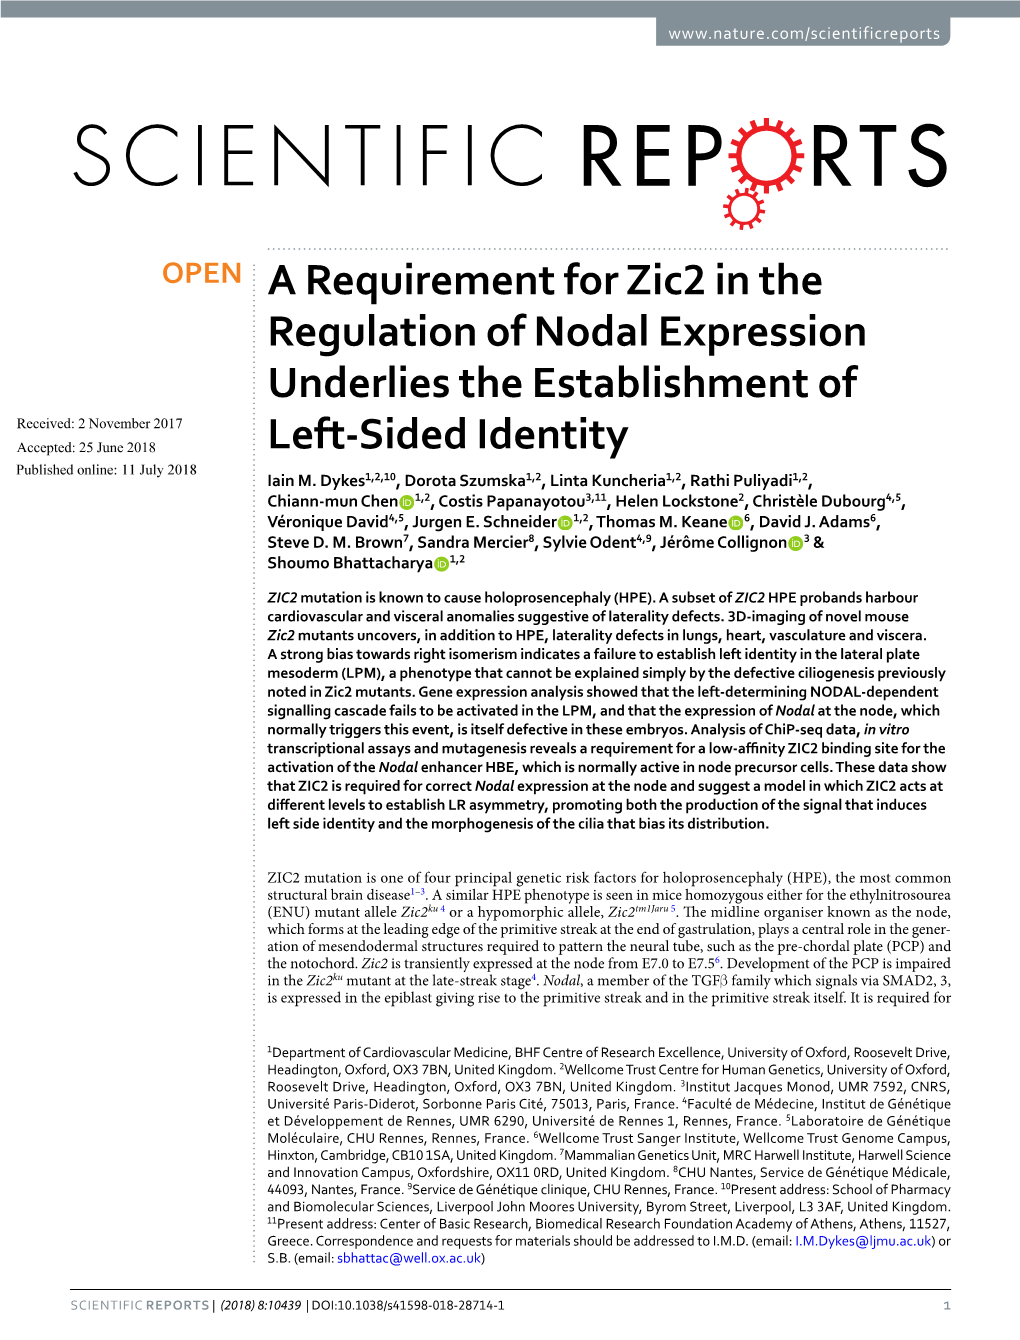 A Requirement for Zic2 in the Regulation of Nodal